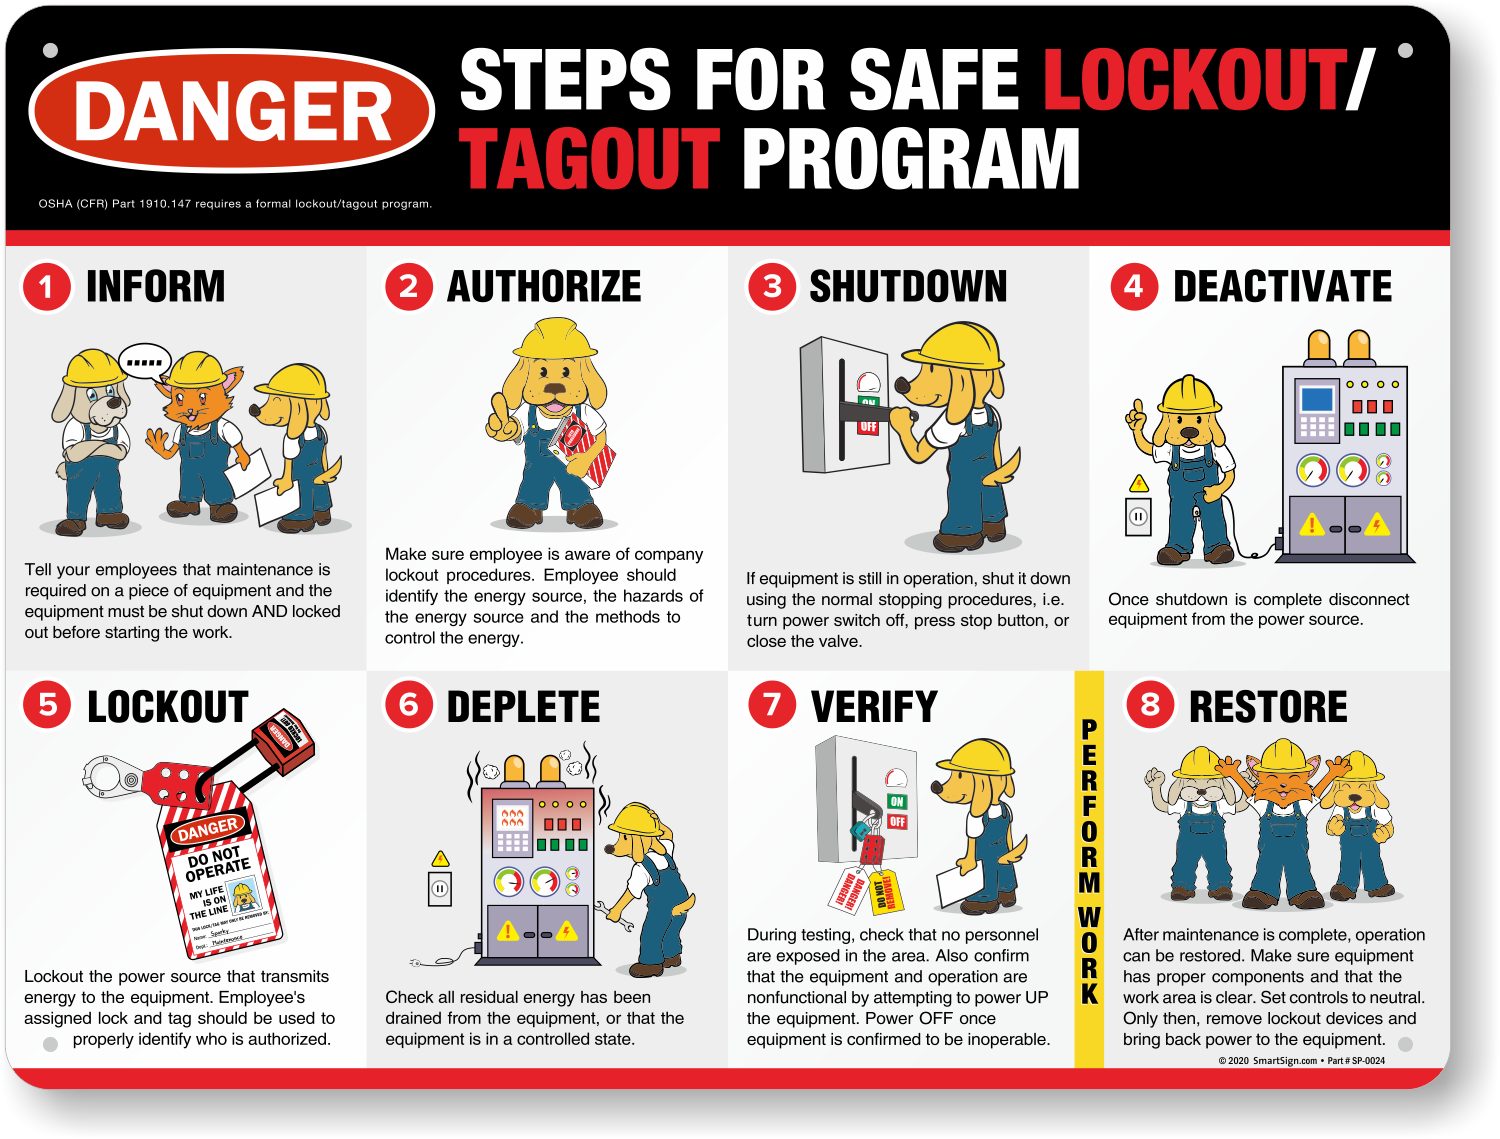 Lock out tag out process - journalHop